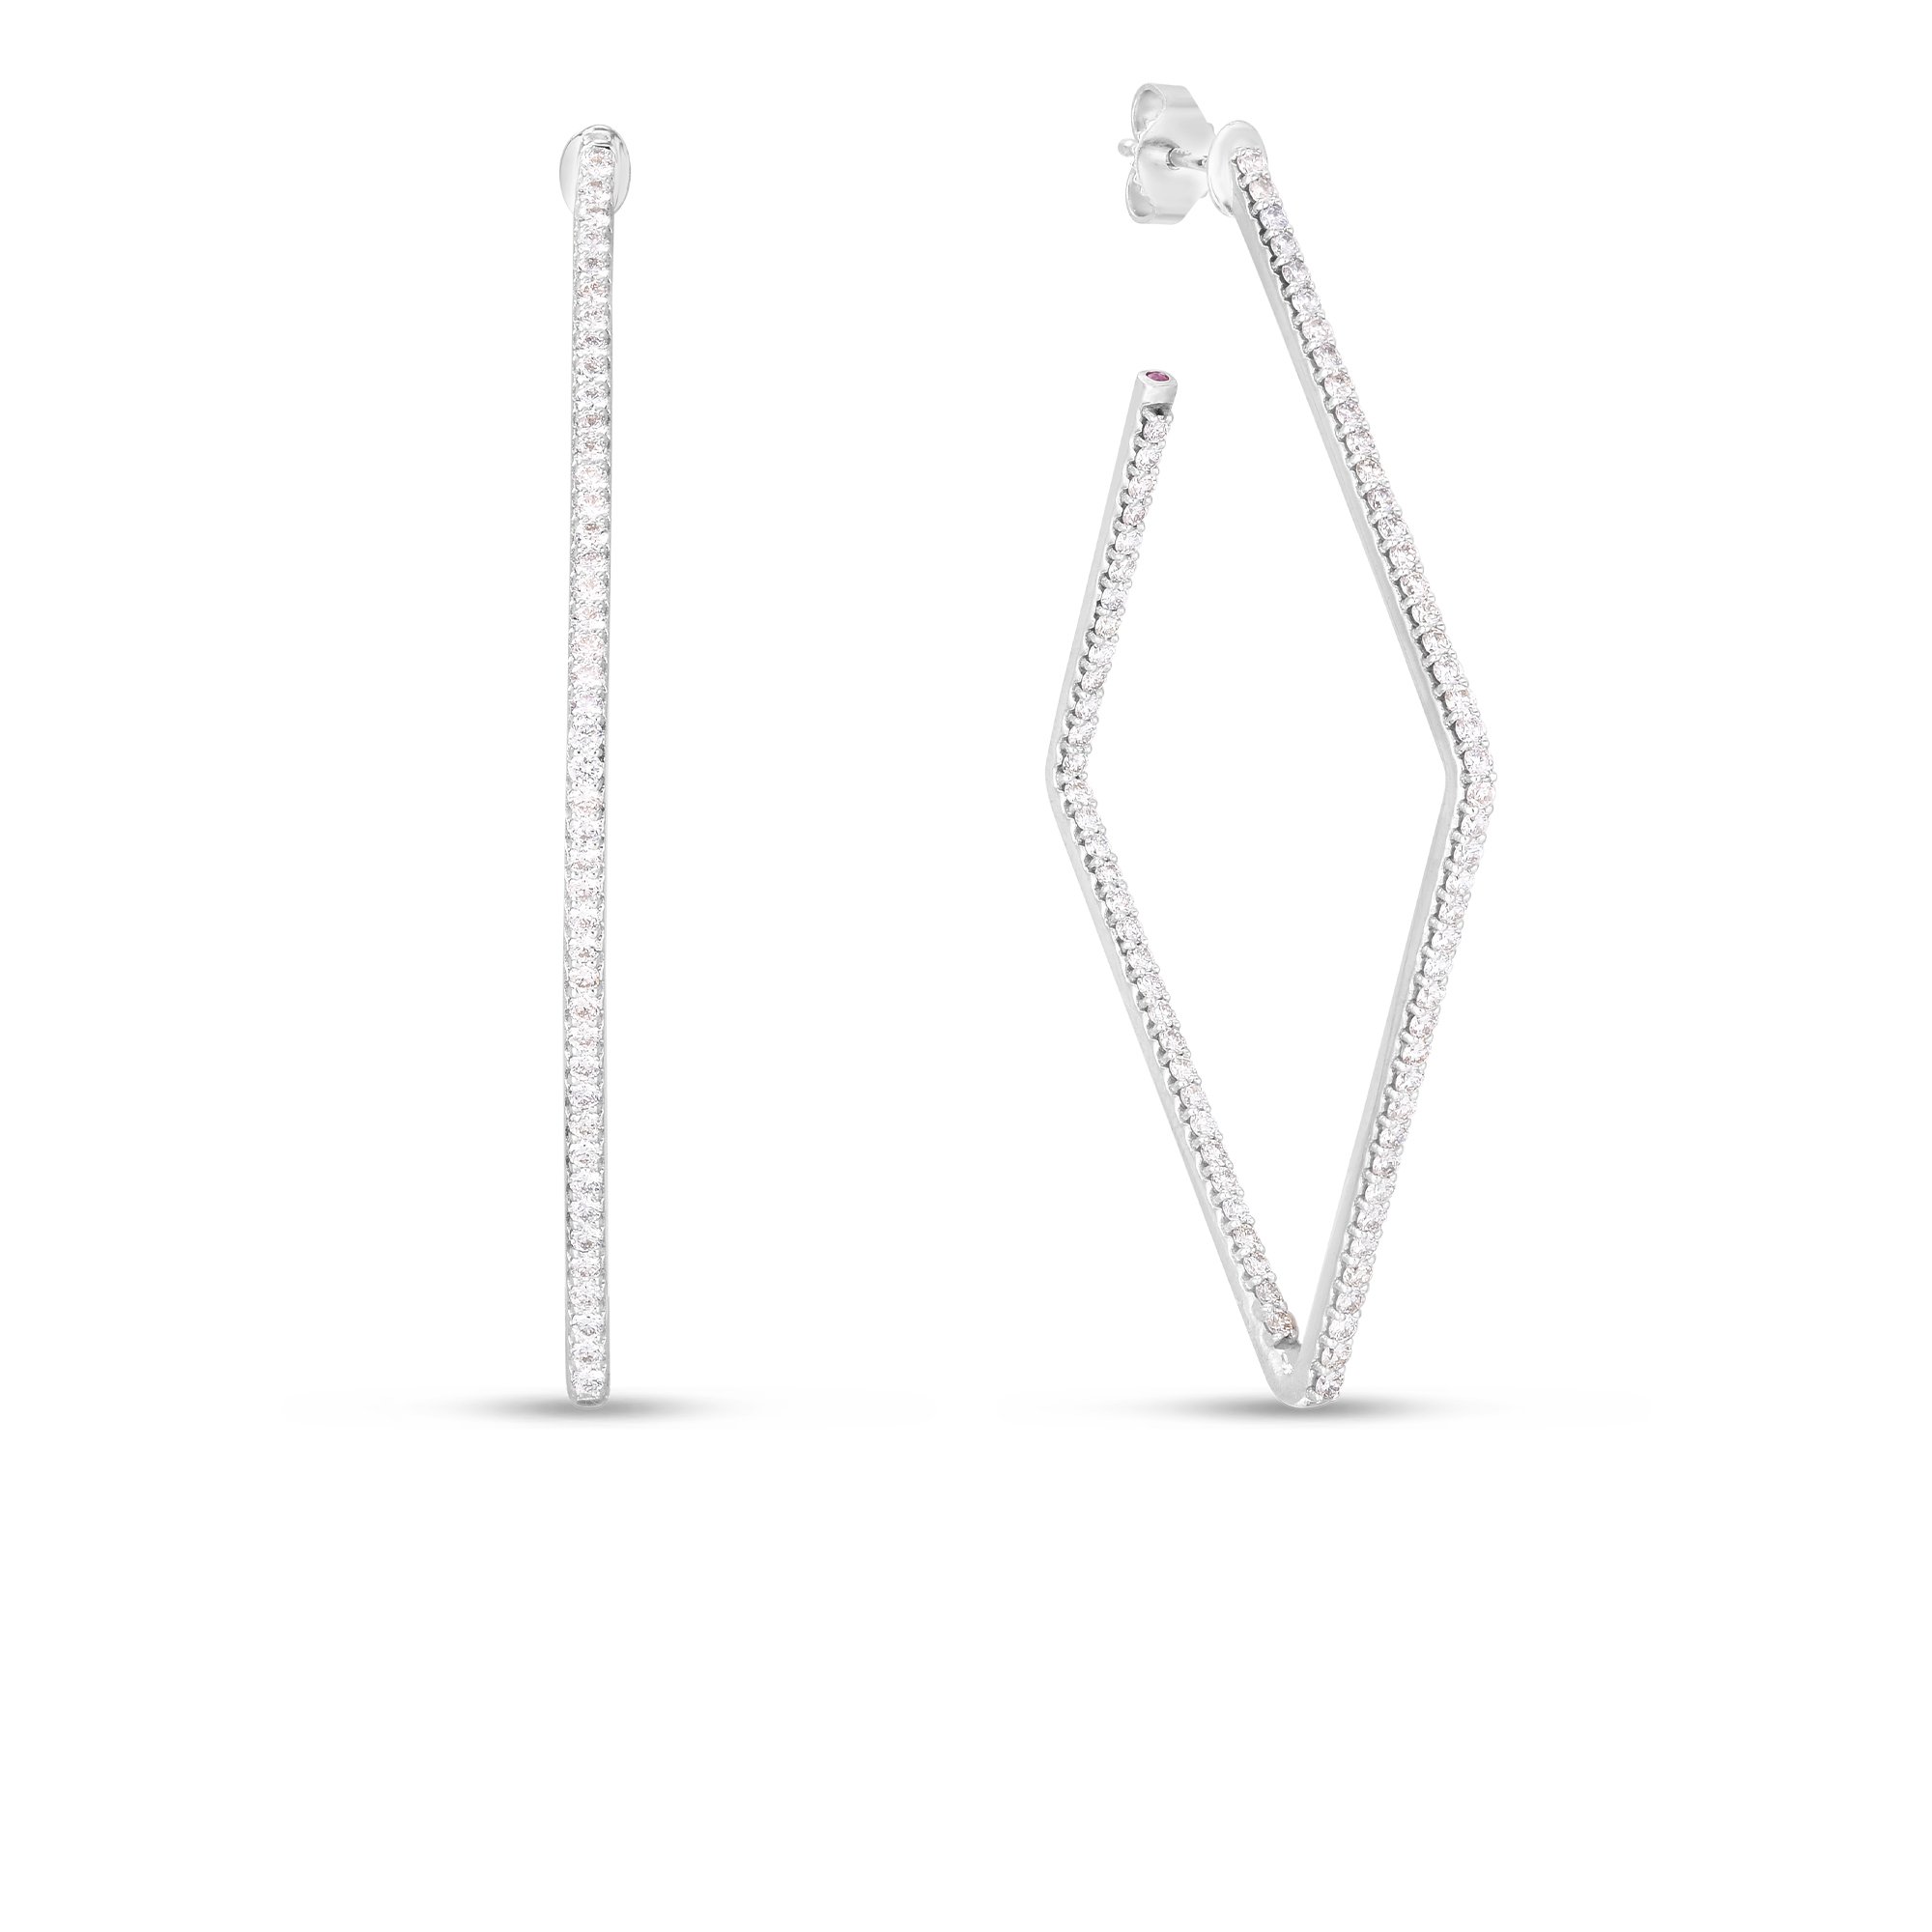 Perfect Diamond Hoops Large Square Earrings in 18kt White Gold